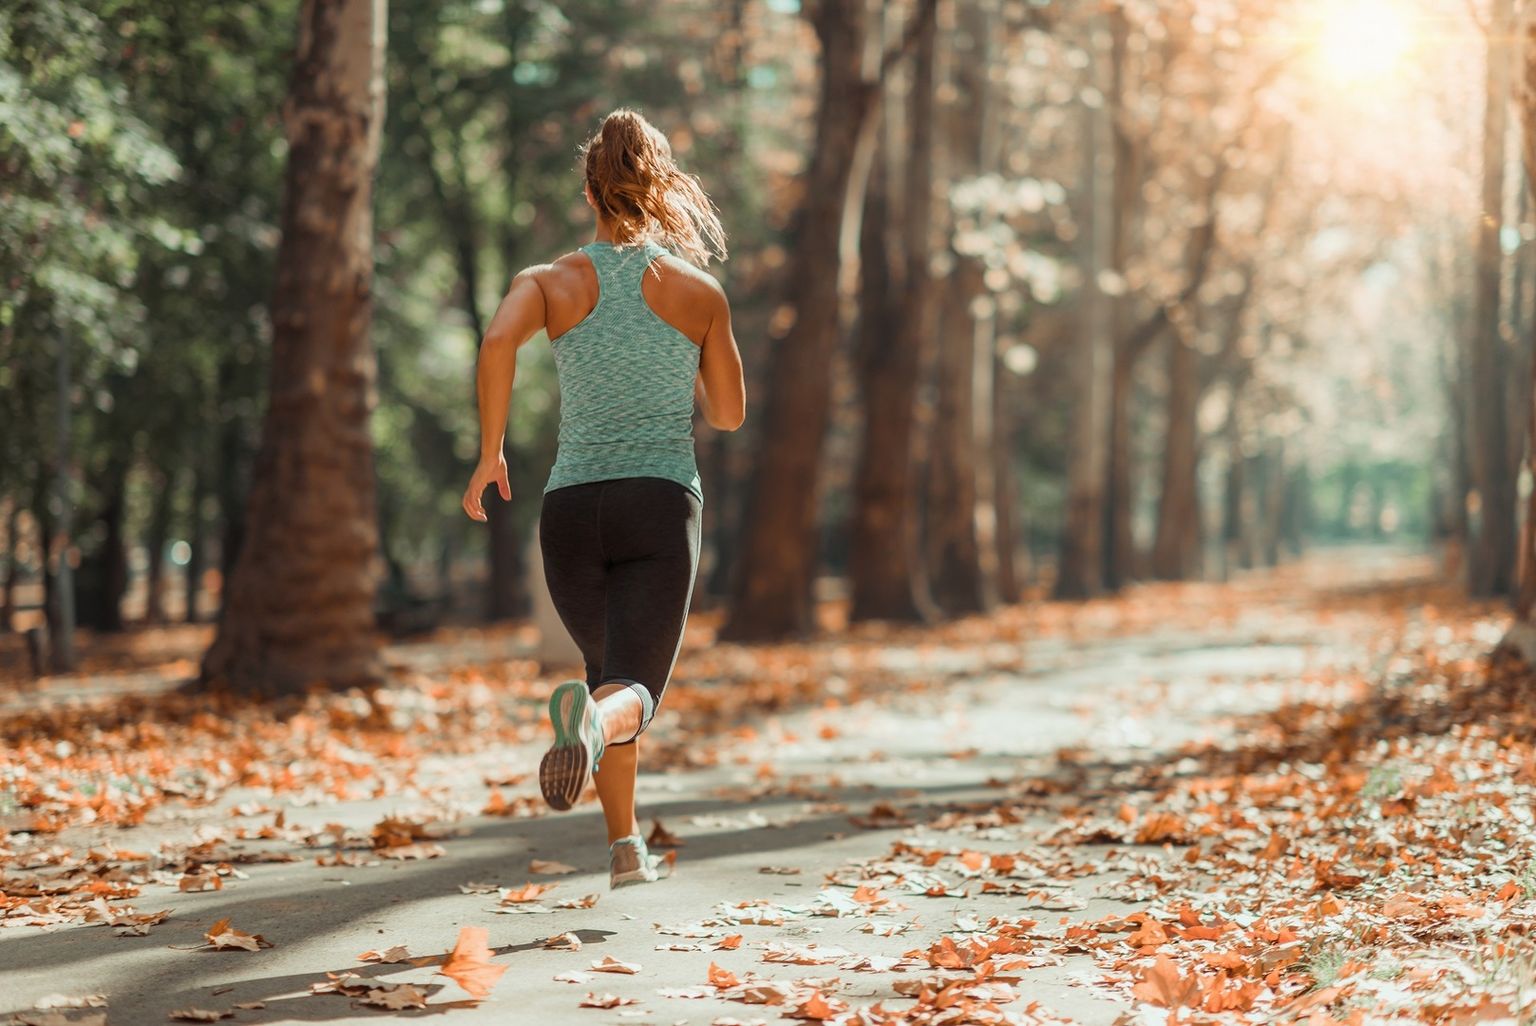 Woman running on a forest path - Good fitness contributes to better health in more ways than one.